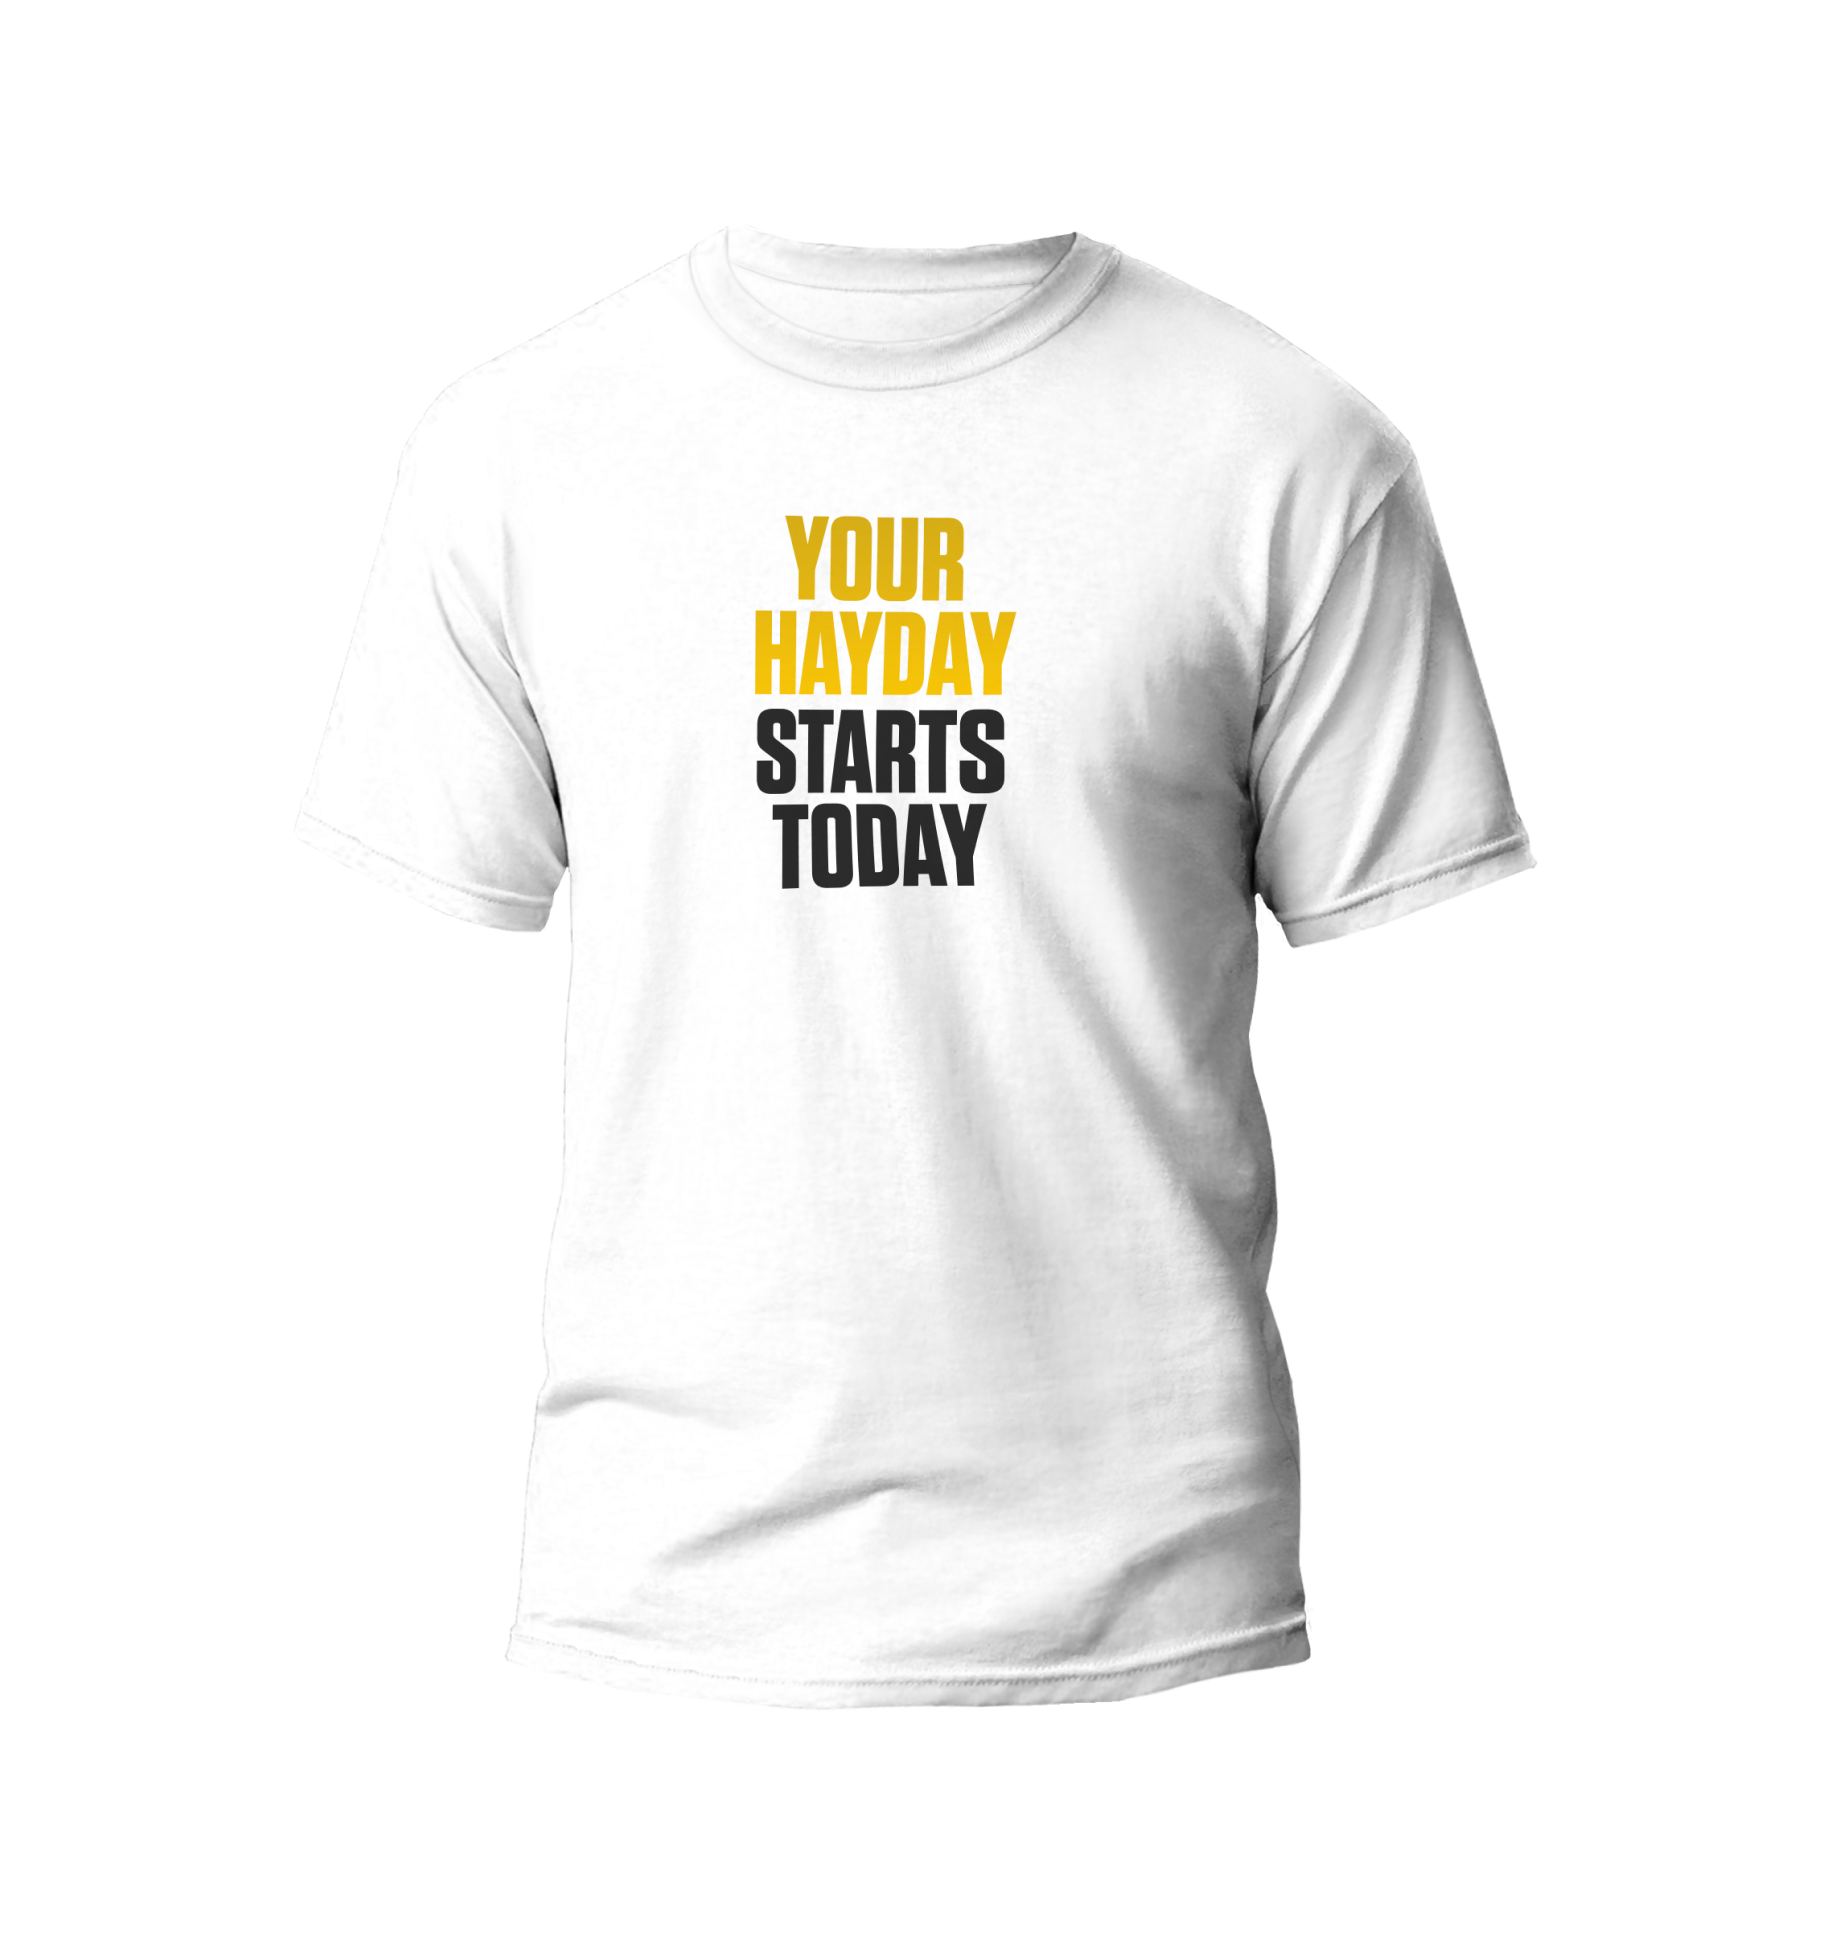 "Your Hayday Starts Today" Shirt 